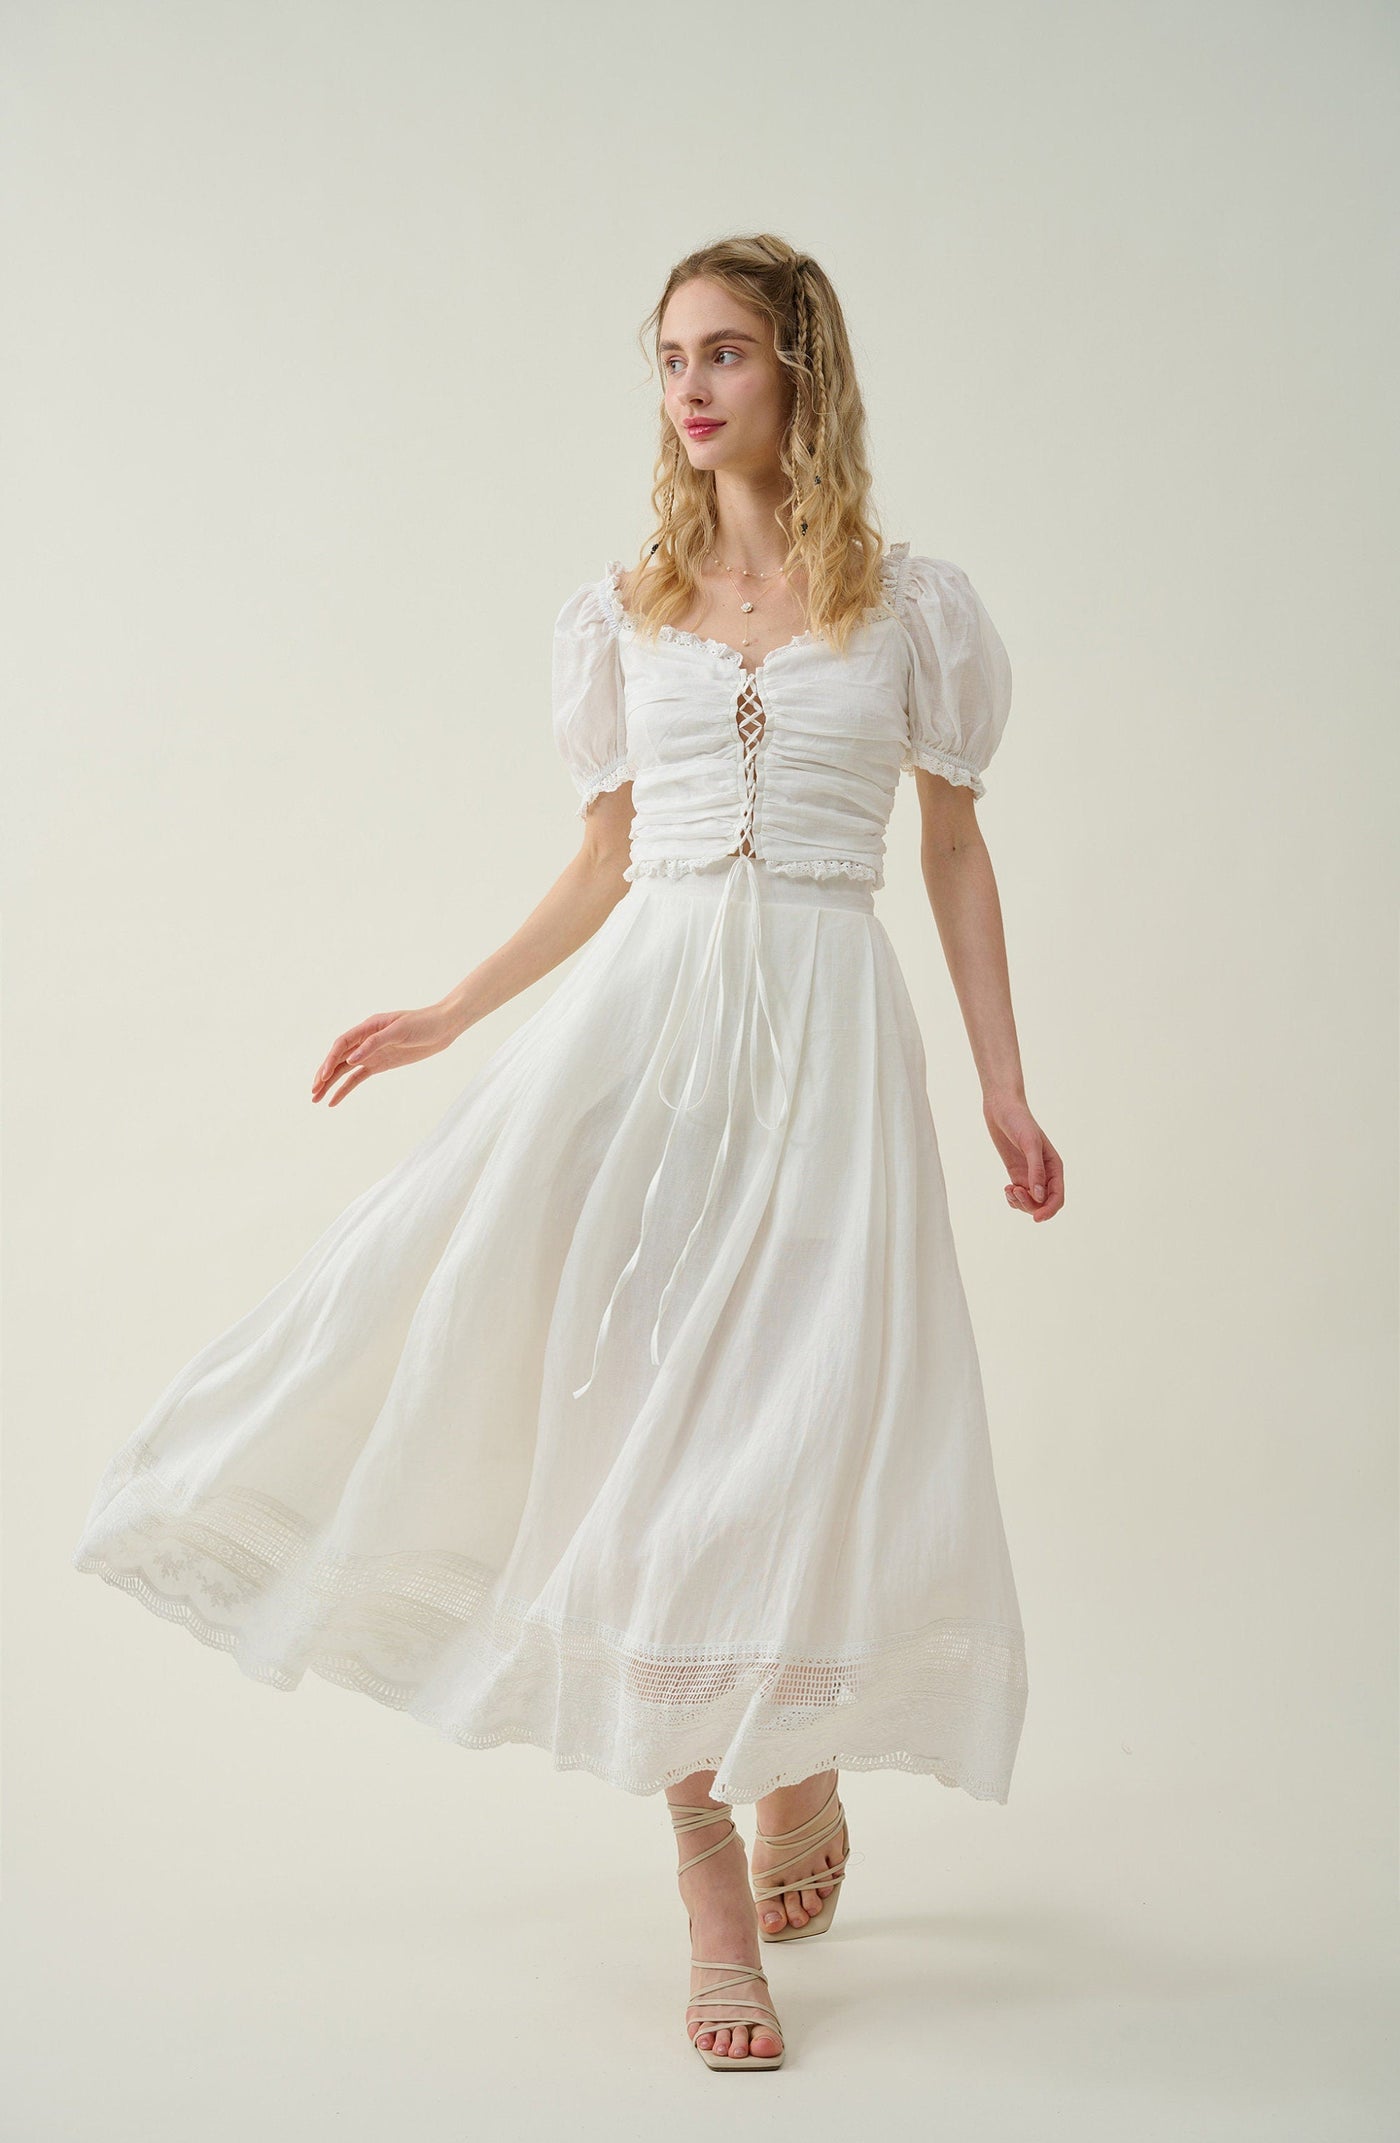 Nellie 21 |Linen skirt with Lace